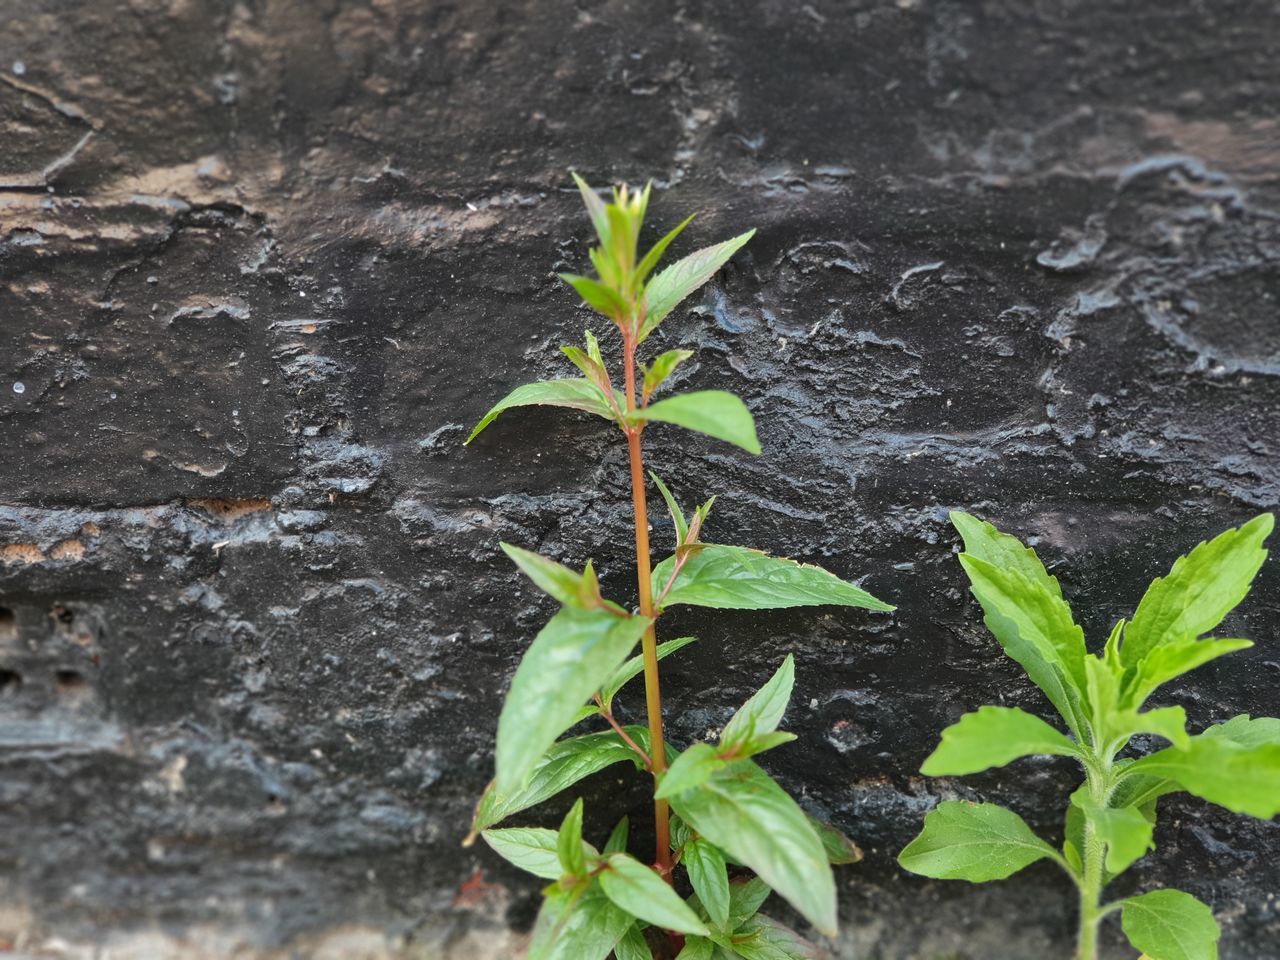 CLOSE-UP OF SMALL PLANT